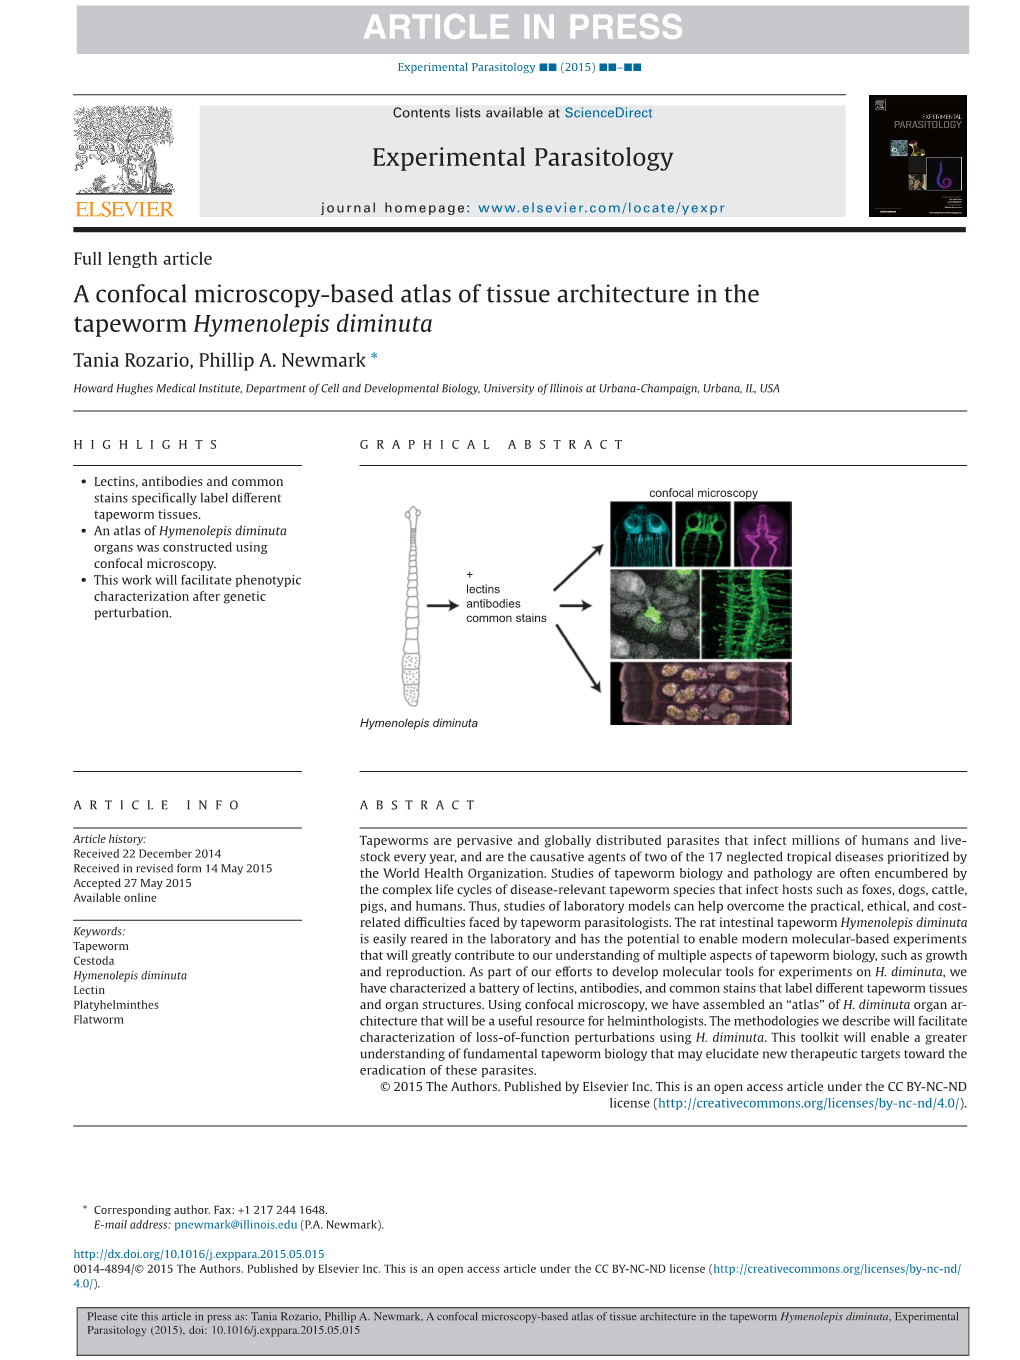 A Confocal Microscopy-Based Atlas of Tissue Architecture in the Tapeworm Hymenolepis Diminuta Tania Rozario, Phillip A